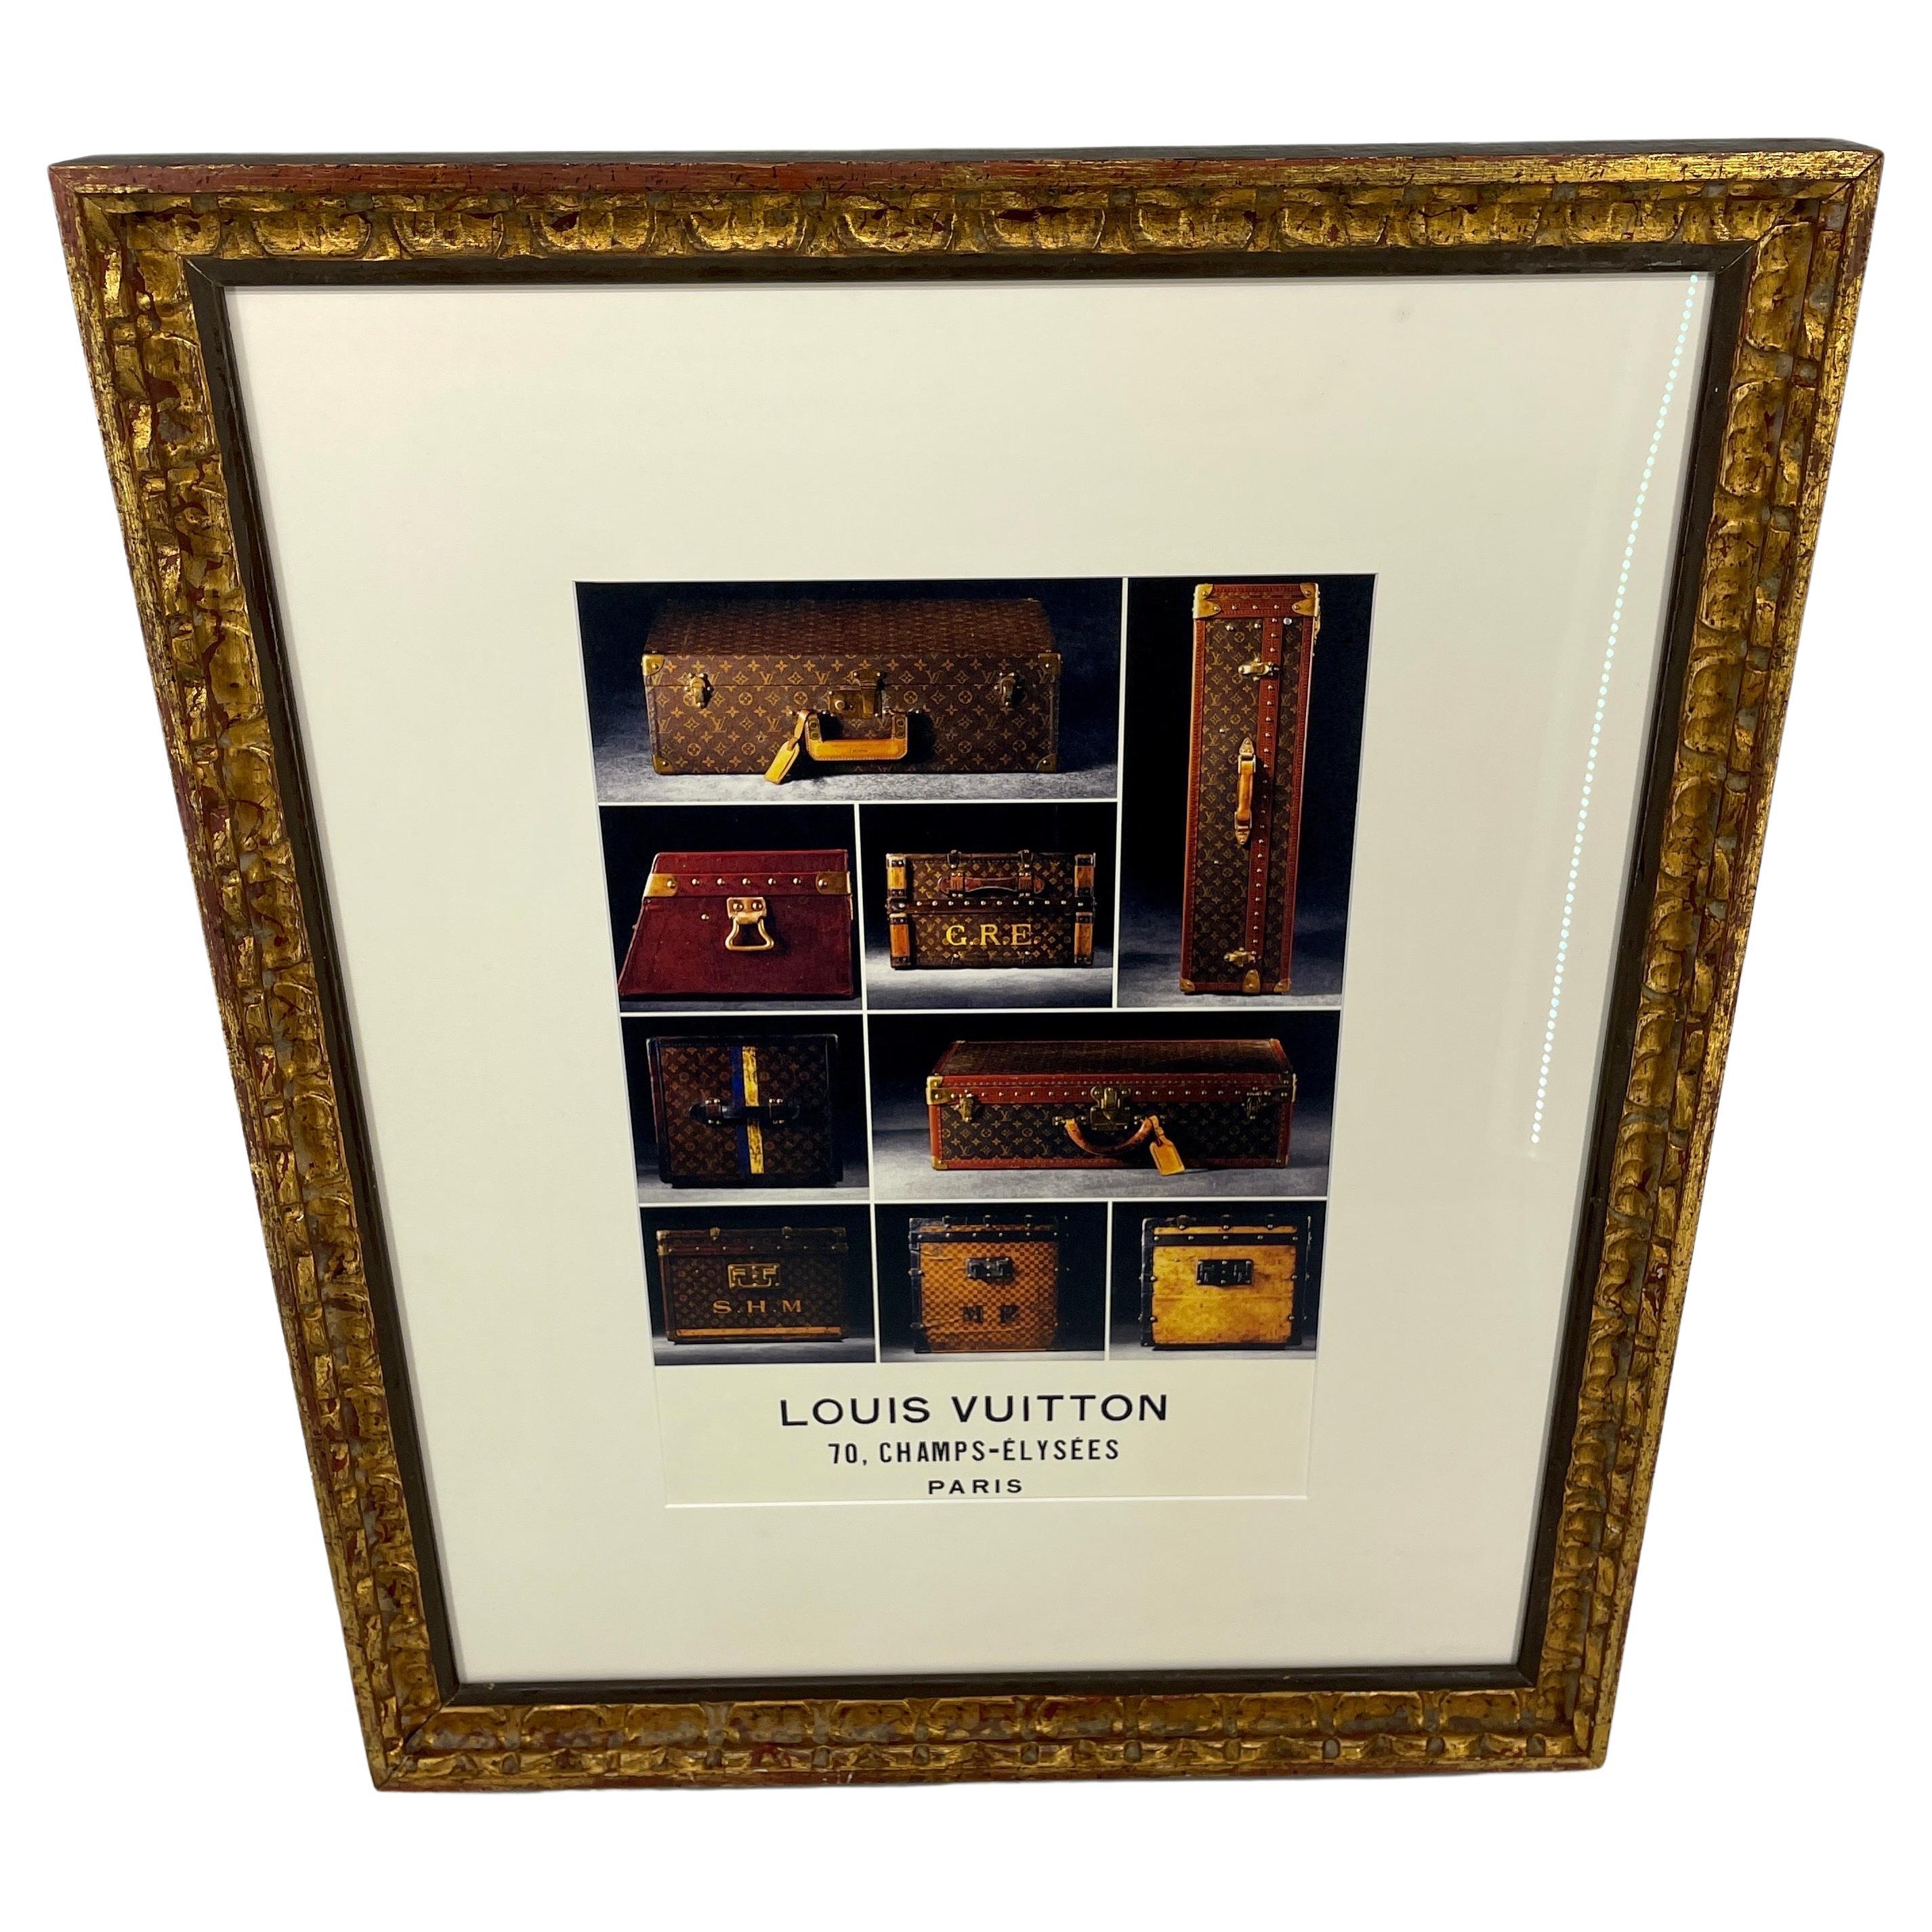 French Art Print Trunks and Suitcases in Vintage Gilt Frame, Louis Vuitton

Wonderful Louis Vuitton Print from Paris, France framed in a vintage gilded wood frame. This one of a kind matted artwork, found on the streets of Paris, features the iconic